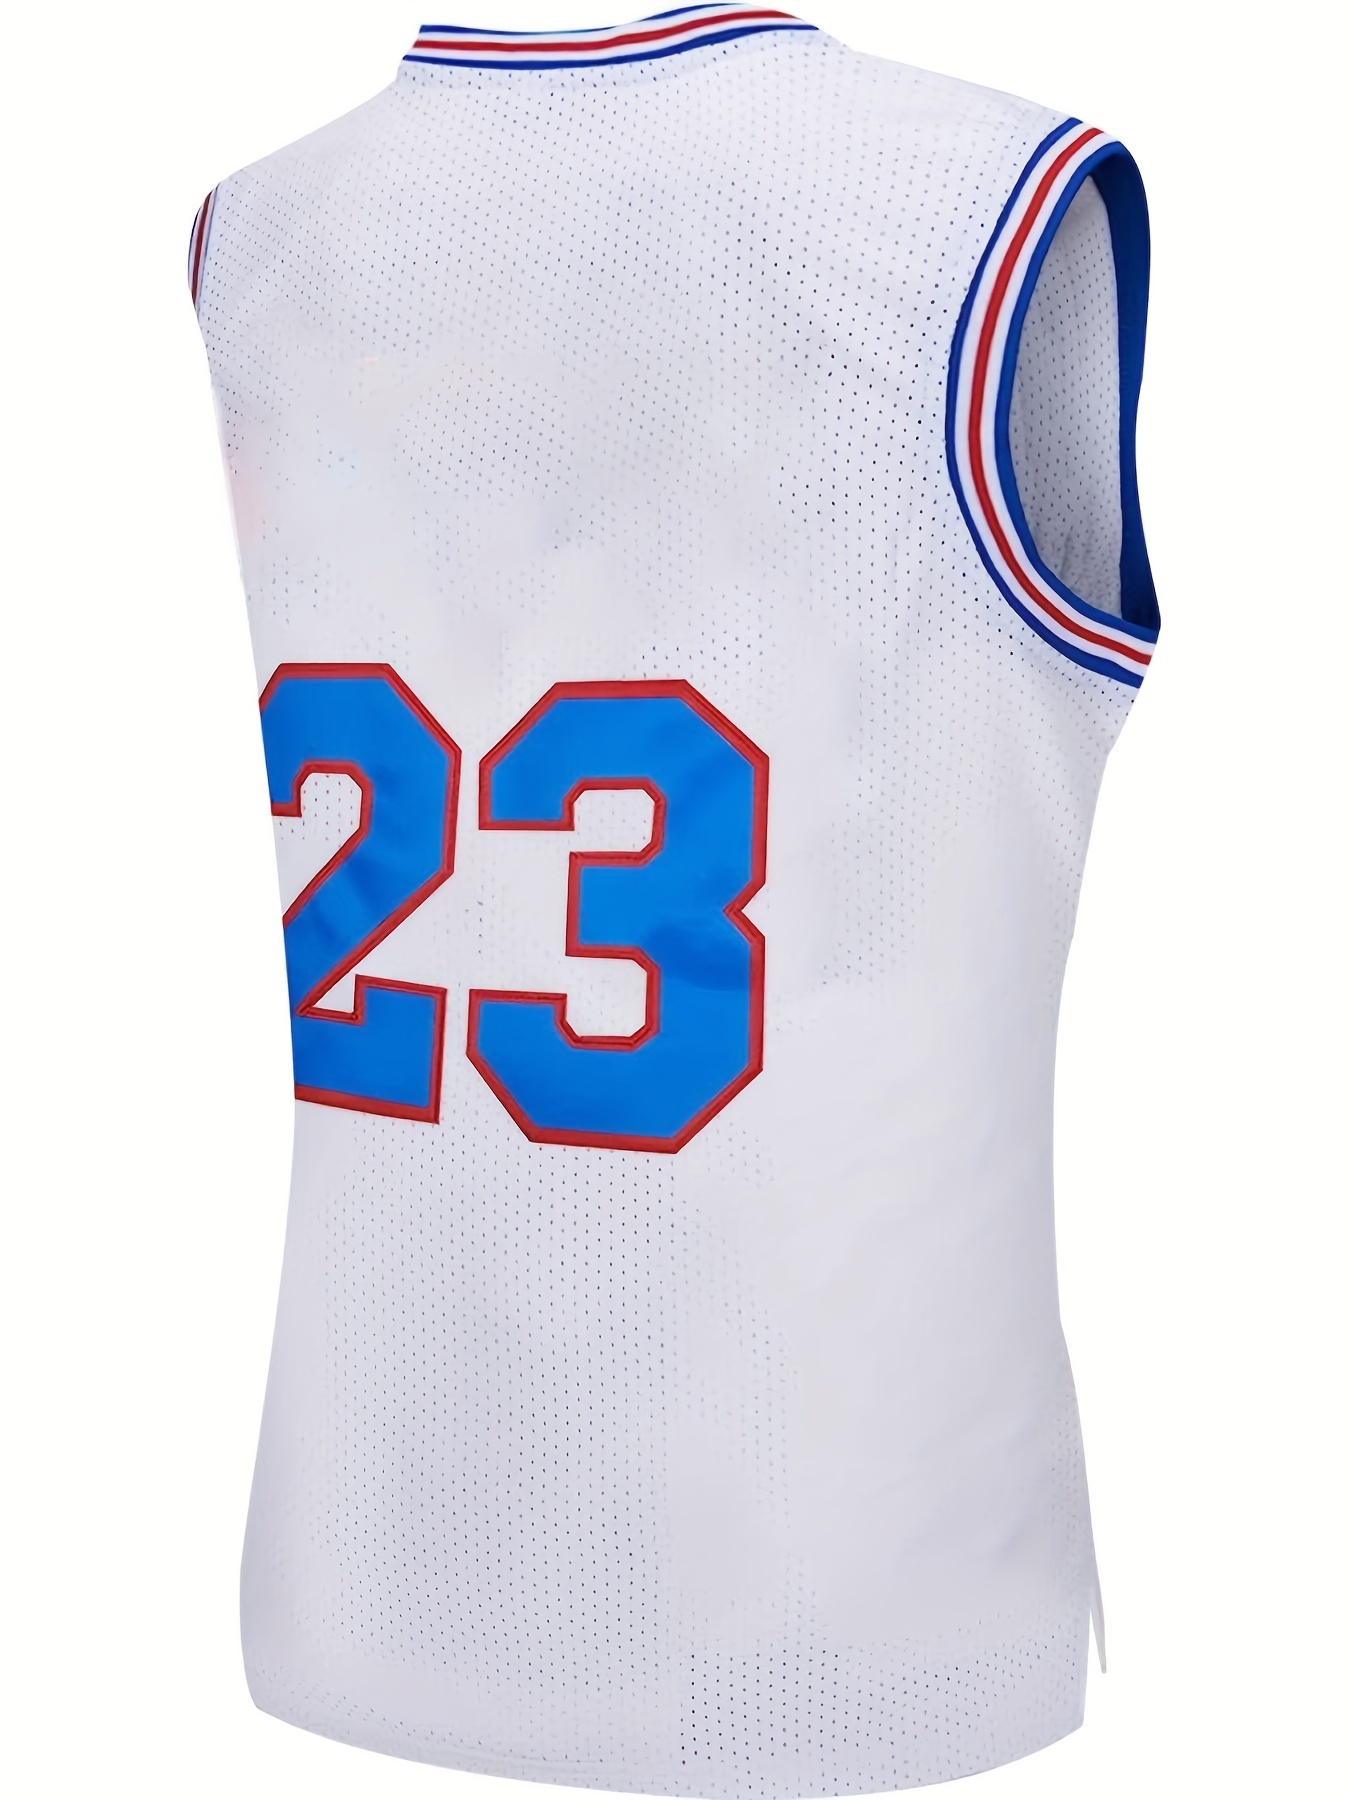 YOUI-GIFTS Mens Basketball Jersey TAZ Moive Space Sports Shirts 90s Hiphop  Party Clothing